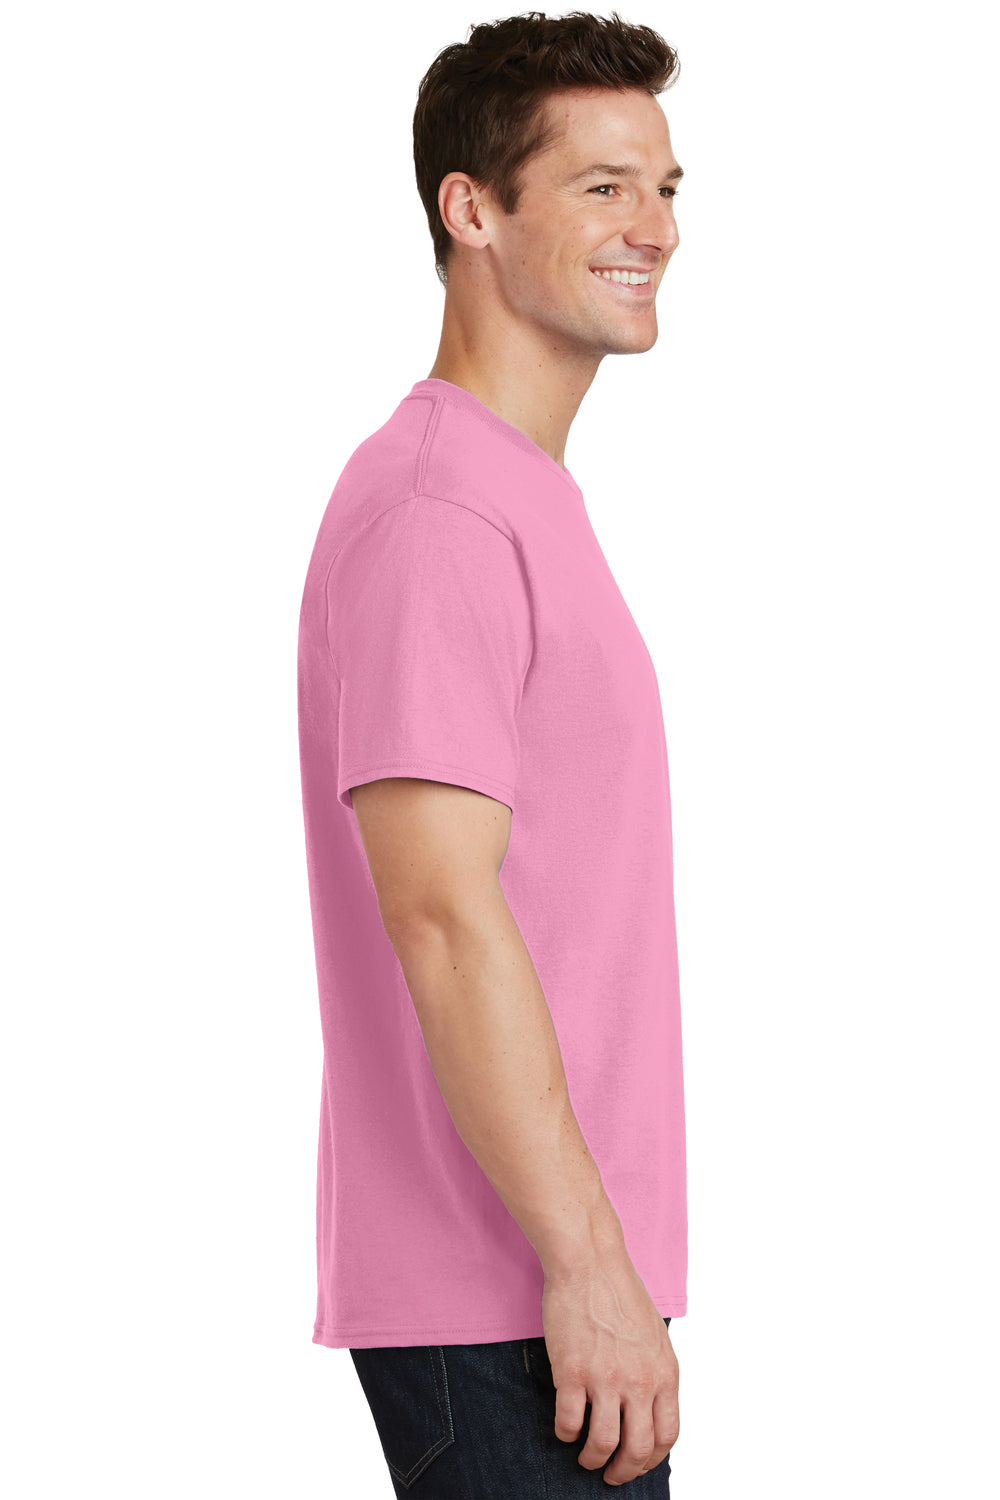 Port & Company PC54 Mens Core Short Sleeve Crewneck T-Shirt Candy Pink Side